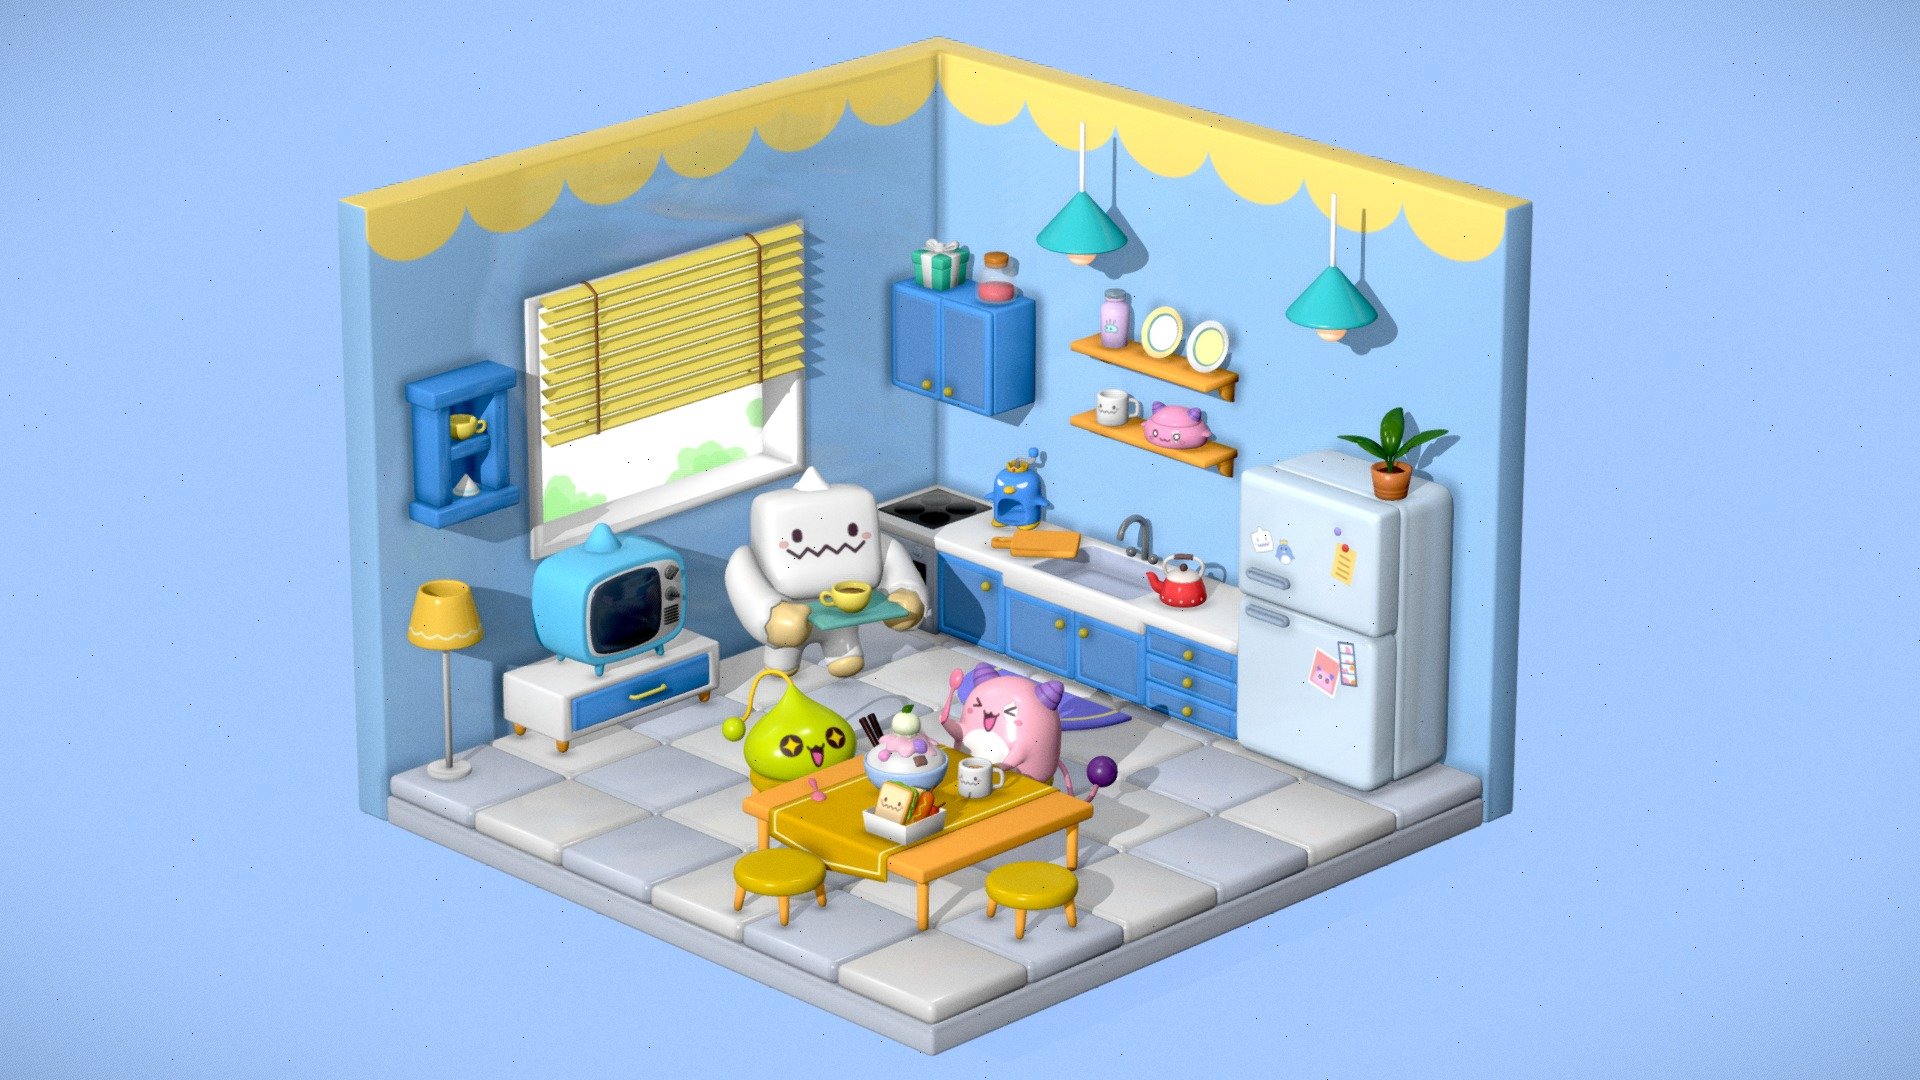 Yeti’s kitchen from game Maplestory.
Original art by @pink_pinkbean 3d model